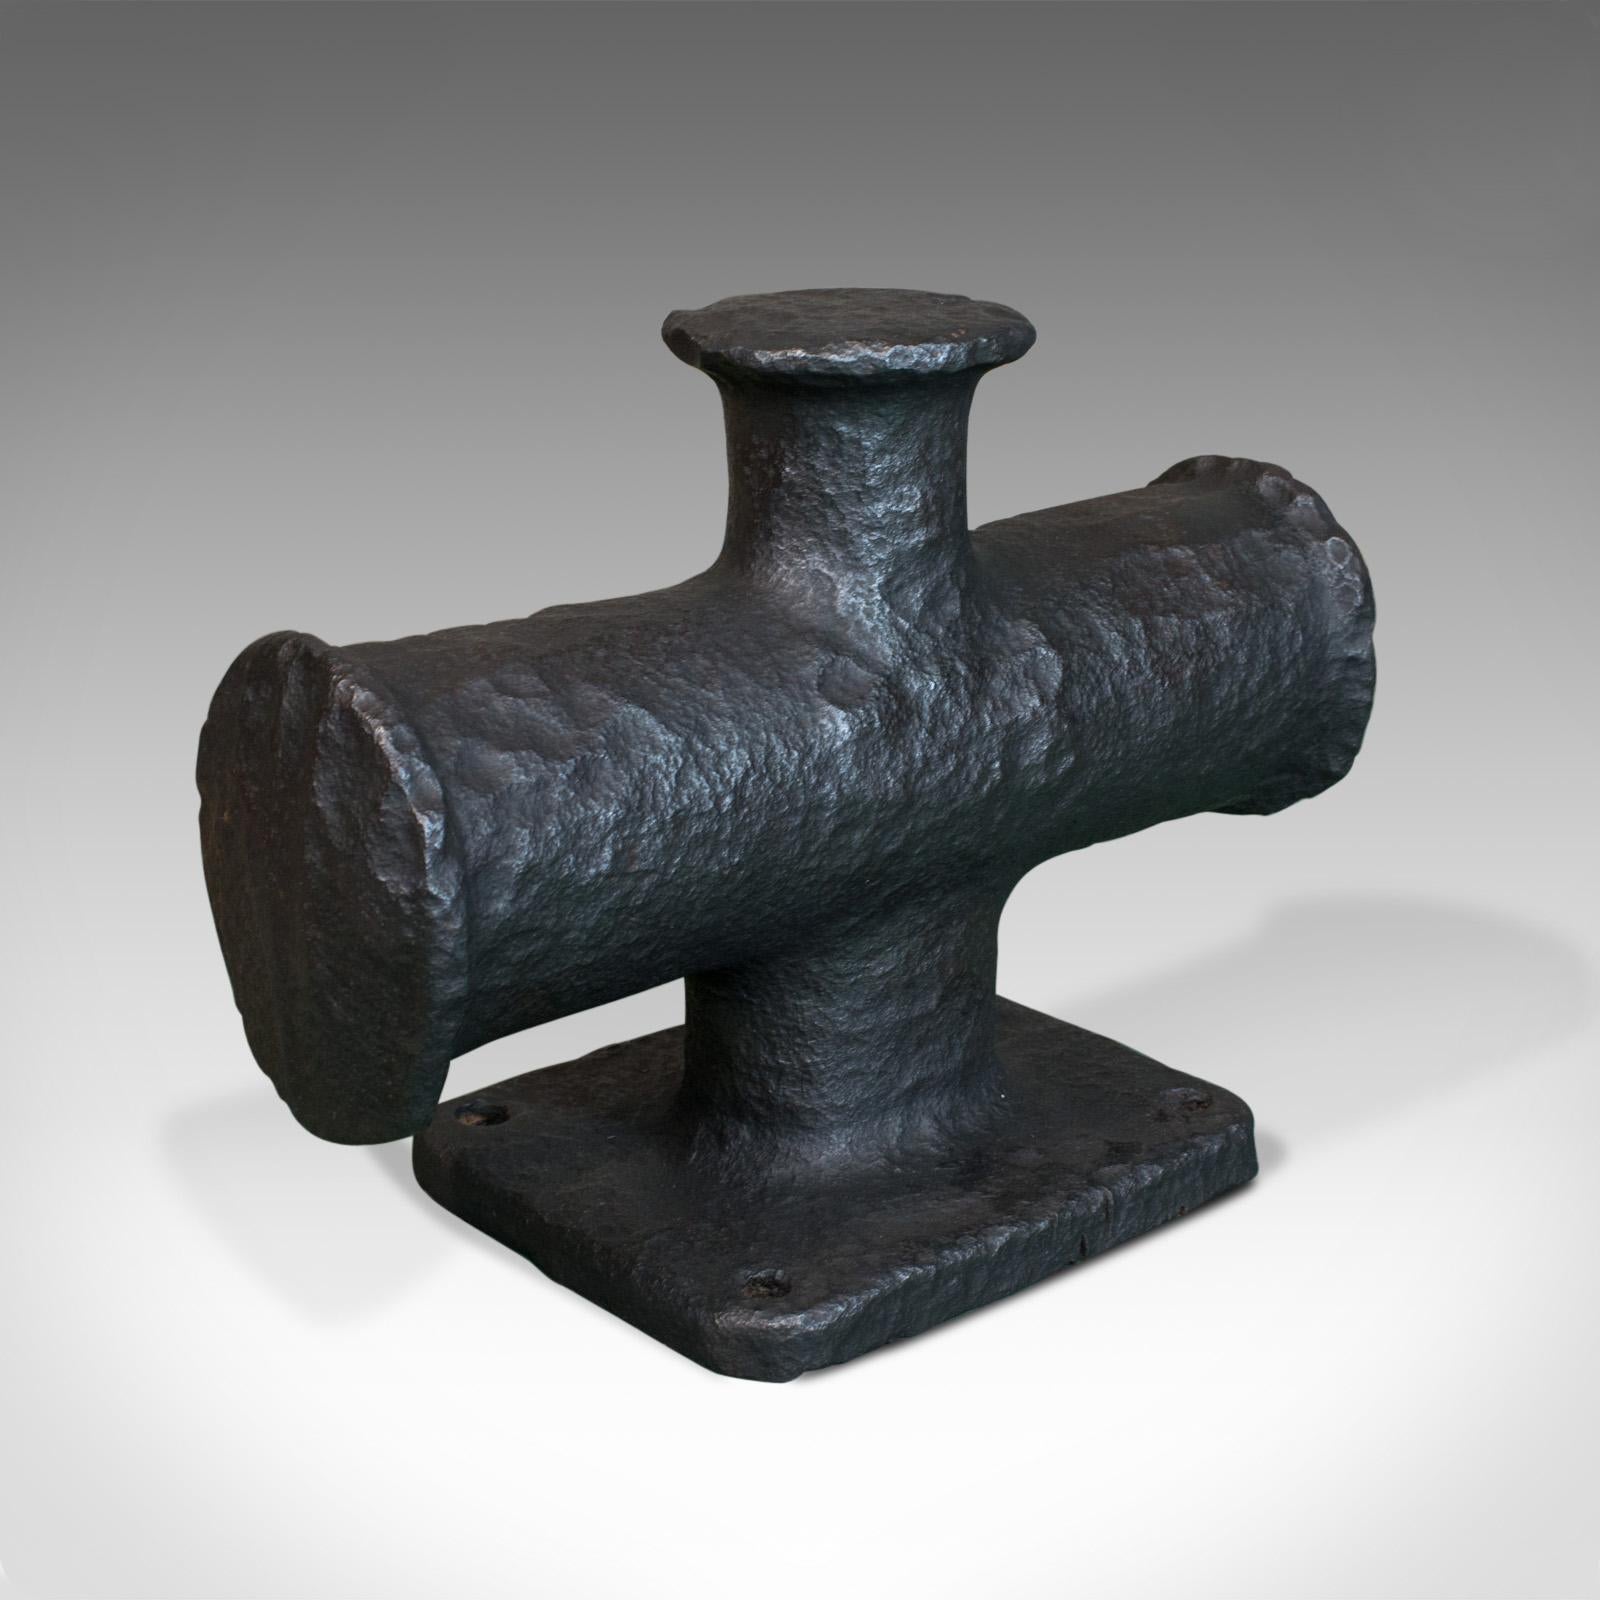 This is an antique ship's mooring bitt or maritime bollard. An English, hollow cast iron, ship’s capstan dating to the late Victorian period, circa 1900.

Stout mooring bollard with 38cm (15 inches) central height
Desirable, time served